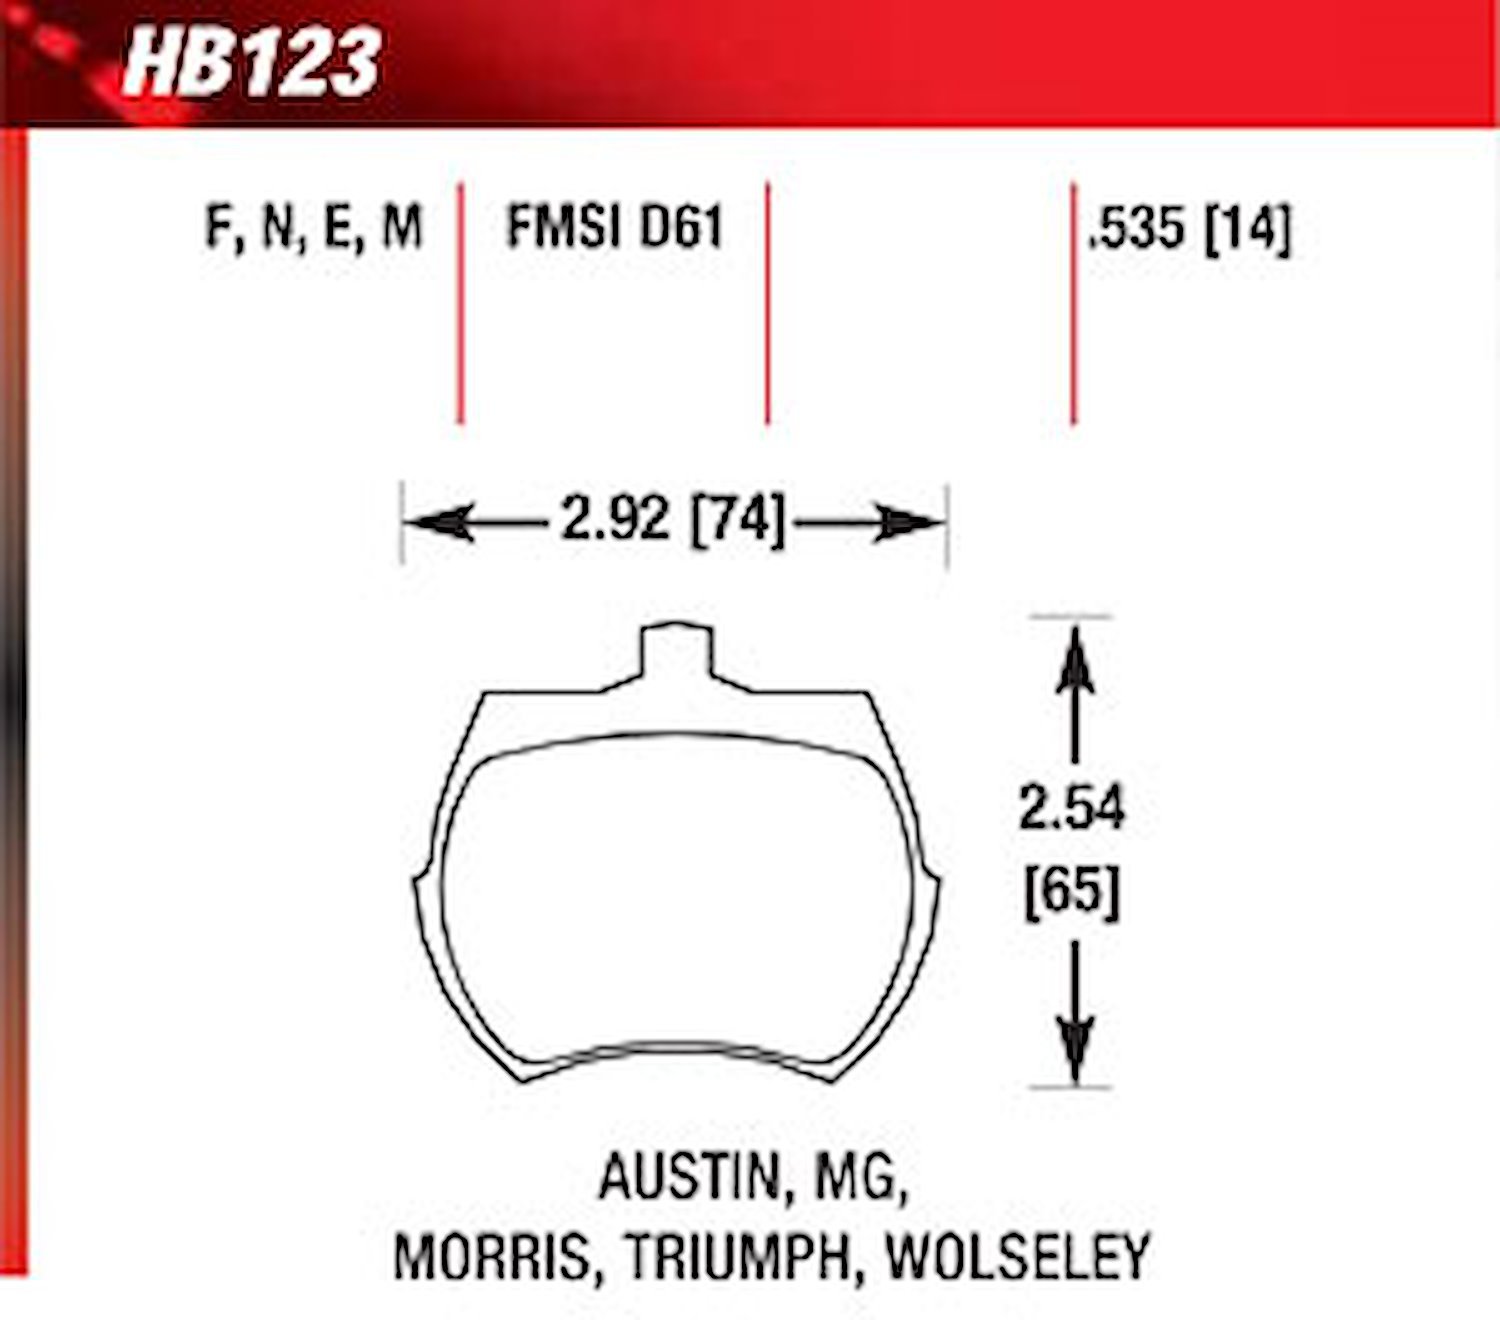 Blue 9012 Disk Brake Pads Ford Crown Victoria, Lincoln, Mercury, Mustang